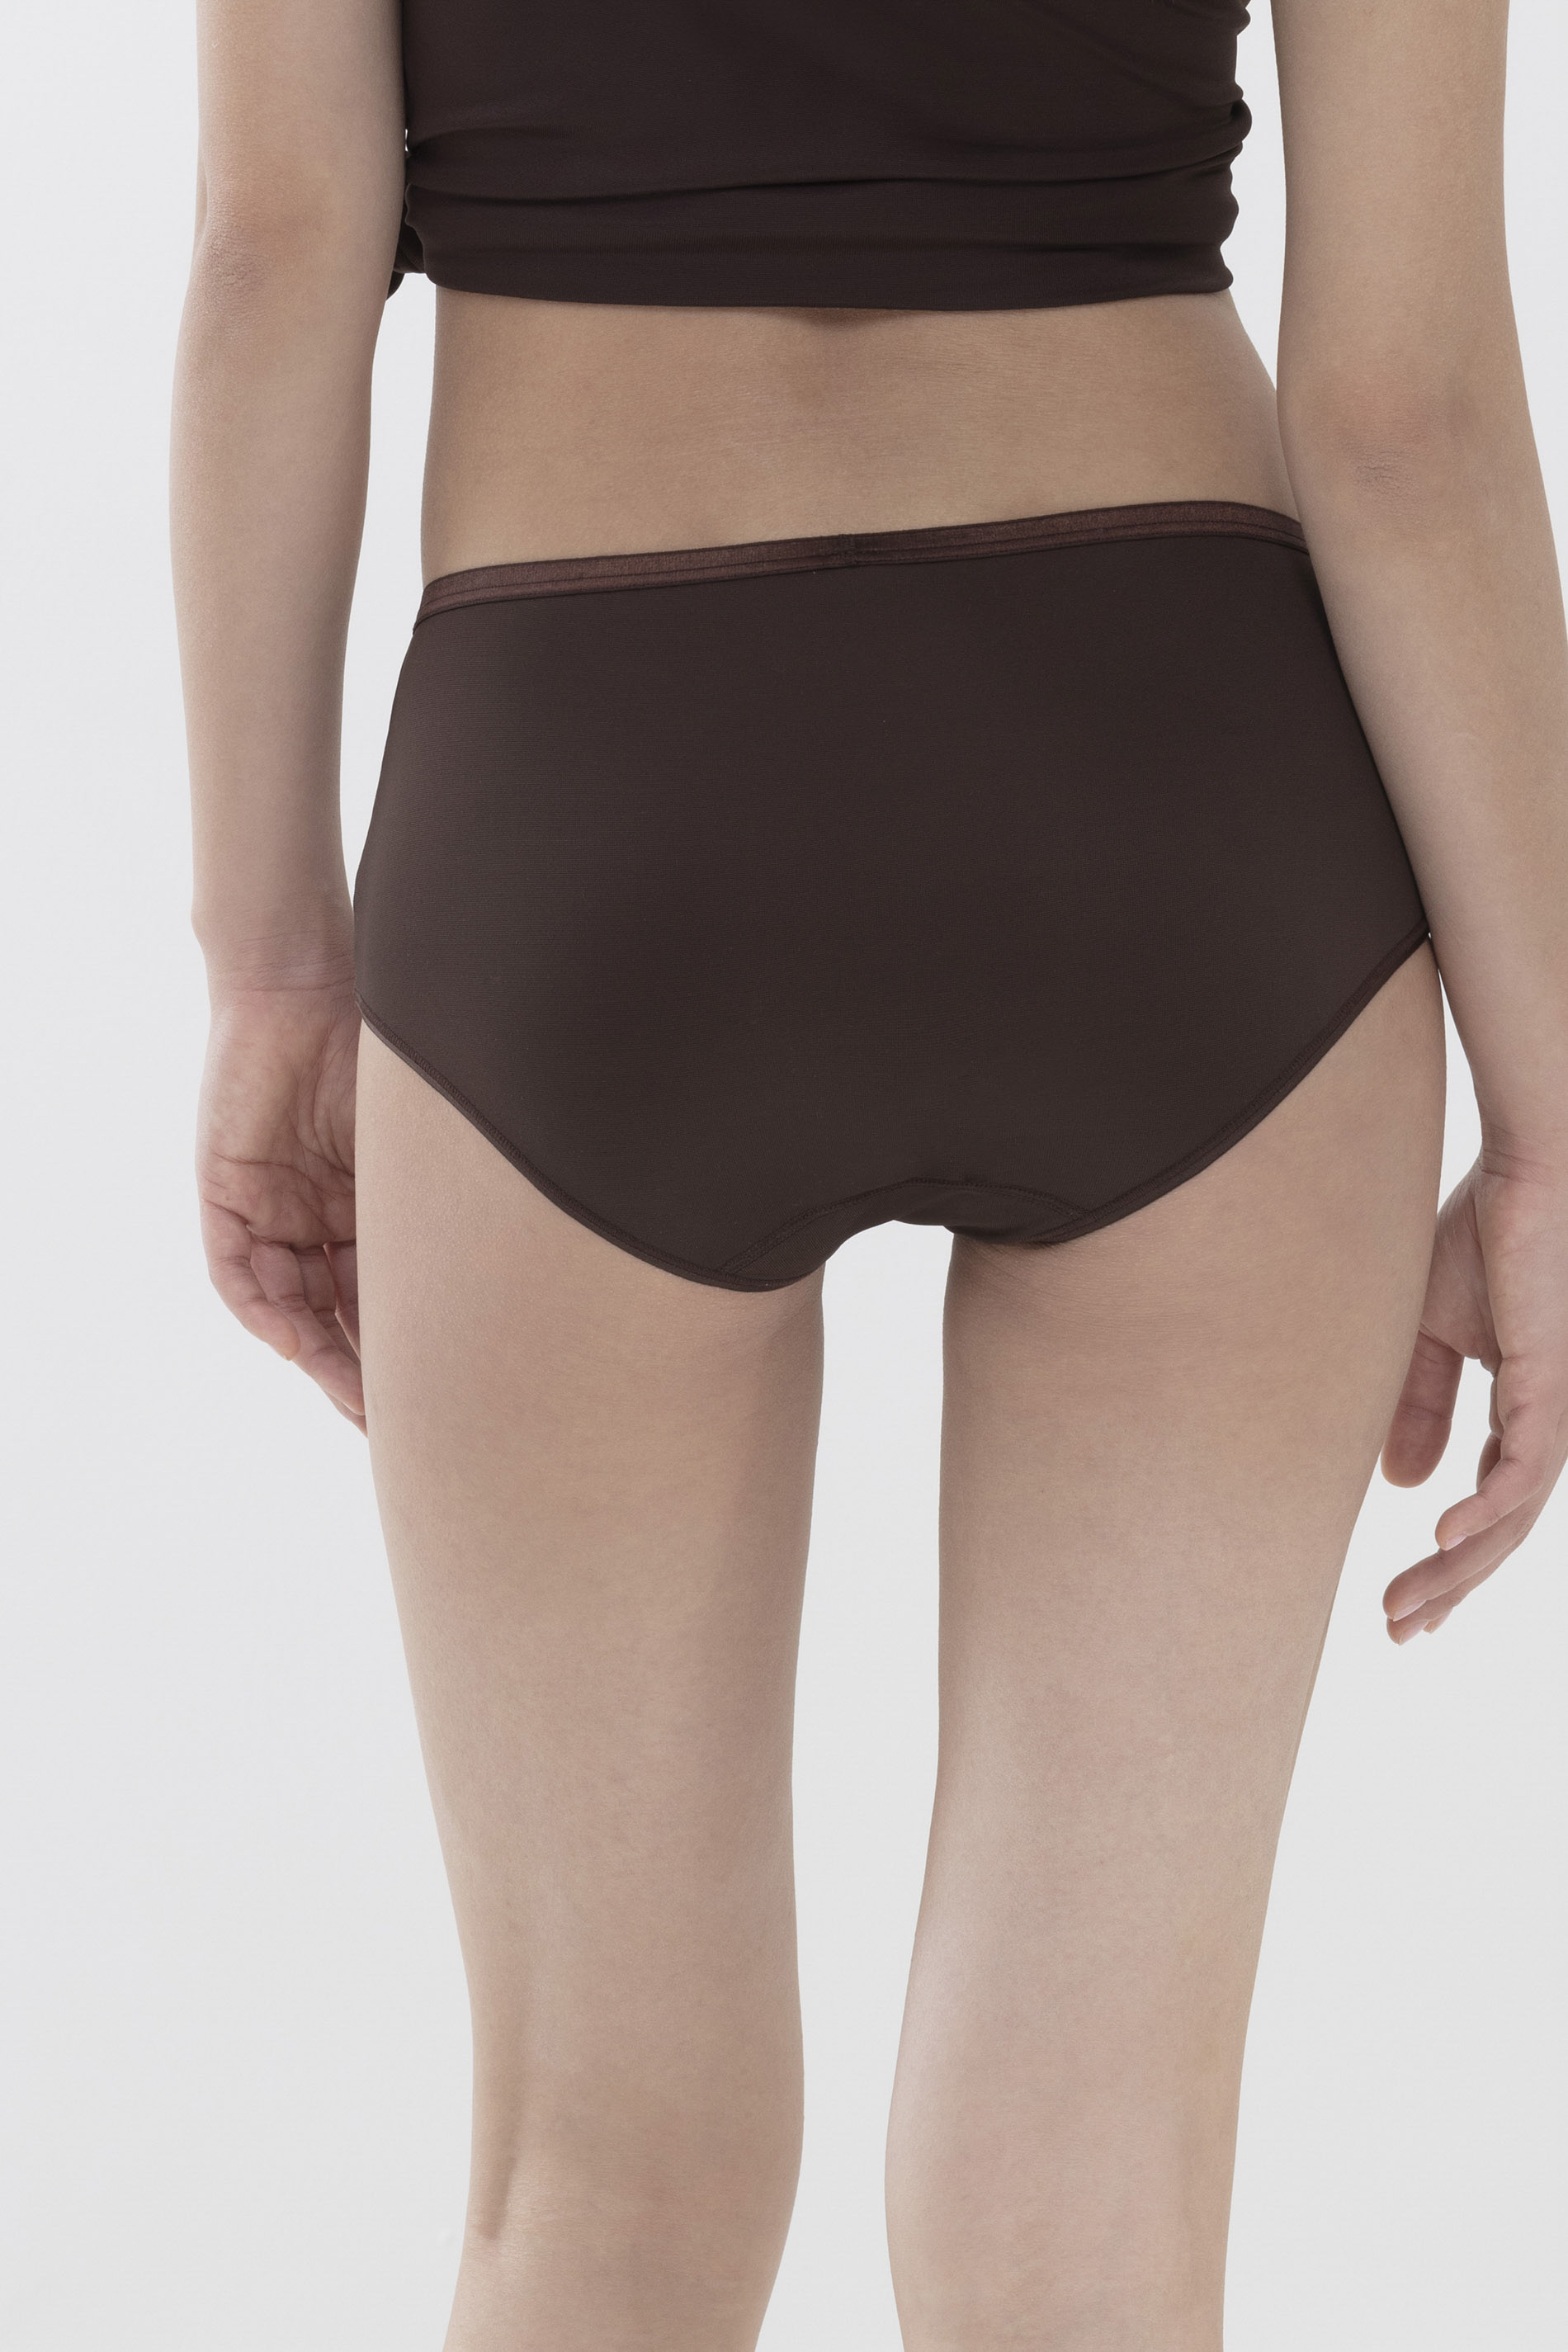 Briefs Liquorice Brown Emotion Deluxe Rear View | mey®